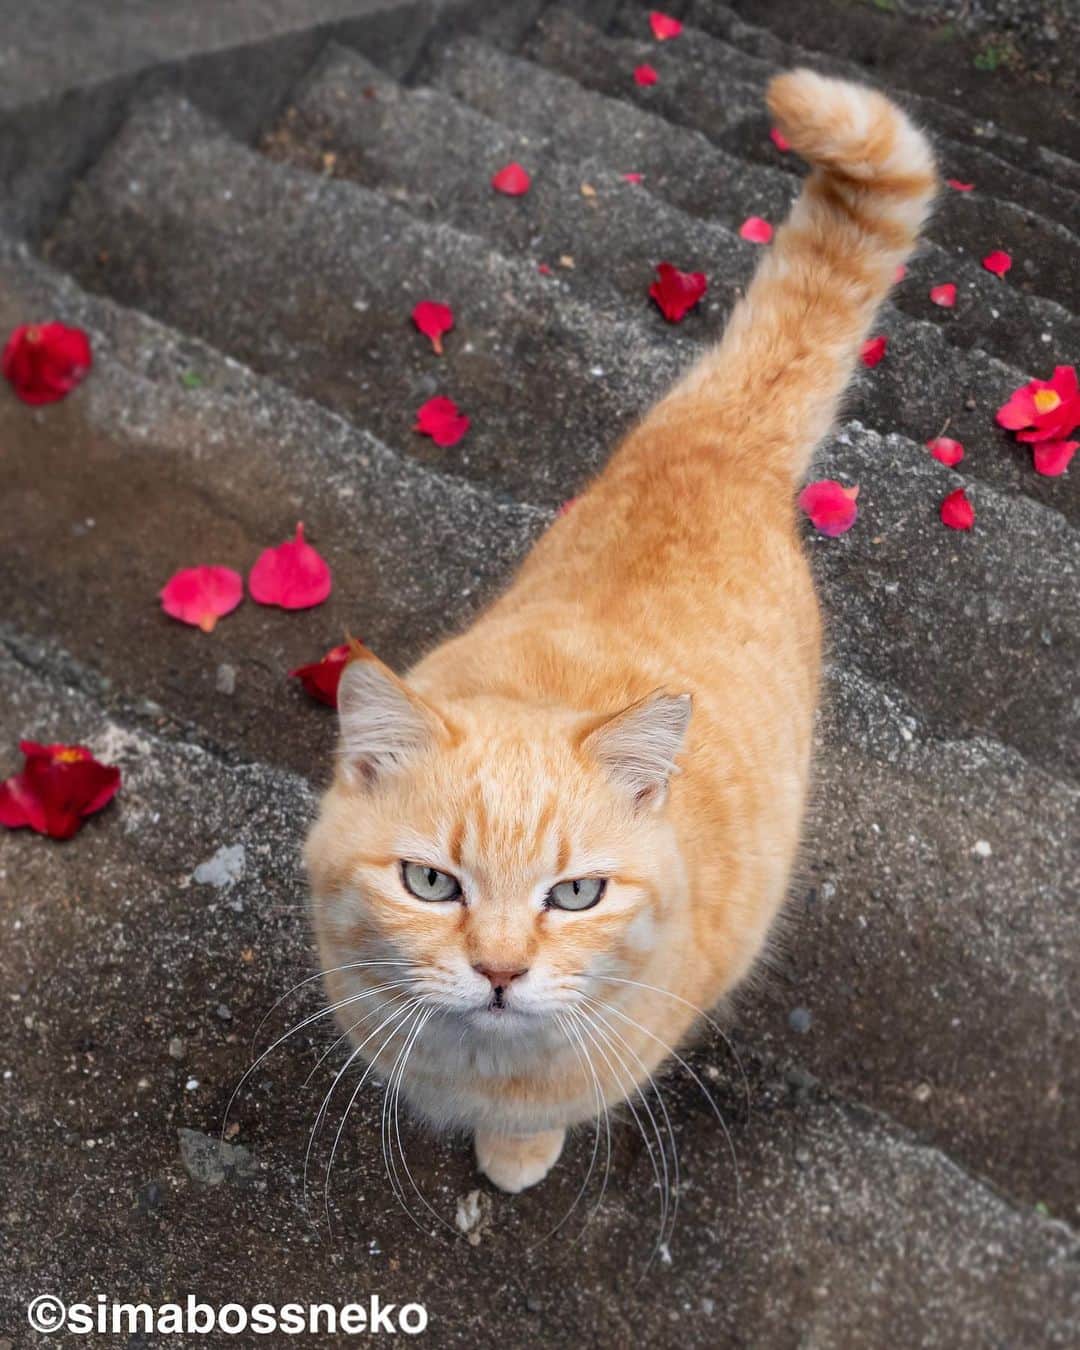 simabossnekoさんのインスタグラム写真 - (simabossnekoInstagram)「・ 花と猫🐱💐絵になります。 Flowers look good on cats. Swipeしてね←←🐾  ※写真は全て「品川キヤノンオープンギャラリーねこ写真展2023」に際して制作したオリジナルフォトブックより  ●品川キヤノンオープンギャラリーねこ写真展2023は、本日10時より開催。  simabossnekoは本日(9/30日 )14時～17時に在廊予定です  9月30日は多くの写真家さんが在廊される予定ですので、是非この機会に足をお運びくださいませ🐾  ・ 【お知らせ】 「品川キヤノンオープンギャラリーねこ写真展2023」の開催にあたって、オリジナルフォトブックを制作させていただきました。  『しまねこ 〜Island Cats〜』 ソフトカバーA4 42ページ  写真展の開催期間中、ギャラリー内にフォトブックを置いていますので、併せてご覧いただけたら幸いです😸✨  ●写真展詳細● 品川キヤノンオープンギャラリーねこ写真展2023 ～今を生きる猫たちのキオク・キロク～  日本各地で活動する猫写真家39名が、猫たちの日常をとらえた作品を展示する写真展です。  ●開催日程：2023/9/20(水)〜10/26(木)  10時〜17時30分　日曜・祝日休館  ●場所：〒108-8011  東京都港区港南2-16-6 キヤノンSタワー2F キヤノンオープンギャラリー2 ●入場無料 ・ ・ 【Notice】 On the occasion of the Shinagawa Canon Open Gallery Cat Photo Exhibition, An original photobook was created.  “Shimaneko ~Island Cats~” Softcover A4 42 pages  During the period of the photo exhibition, along with the exhibited works, the photobook is in the gallery, so I would be happy if you could take a look at it as well.  ●Explanation of photo exhibition●  Shinagawa Canon Open Gallery Cat Photo Exhibition 2023 ～Imao ikiru neko tachino Kioku, Kiroku～  This is a photo exhibition featuring works by 39 cat photographers active in various parts of Japan that capture the daily living of cats. Please take this opportunity to visit us.  ●Event dates: Wednesday, September 20, 2023 – Thursday, October 26, 2023 10:00-17:30 Closed on Sundays and holidays  ●Location: 〒108-8011 2-16-6 Konan, Minato-ku, Tokyo Canon S Tower 2F Canon Open Gallery 2 ●Free admission  ・ #しまねこ #島猫 #ねこ #にゃんすたぐらむ #猫写真 #cats_of_world #catloversclub #pleasantcats #catstagram #meowed #ig_japan #lumixg9」9月30日 6時48分 - simabossneko